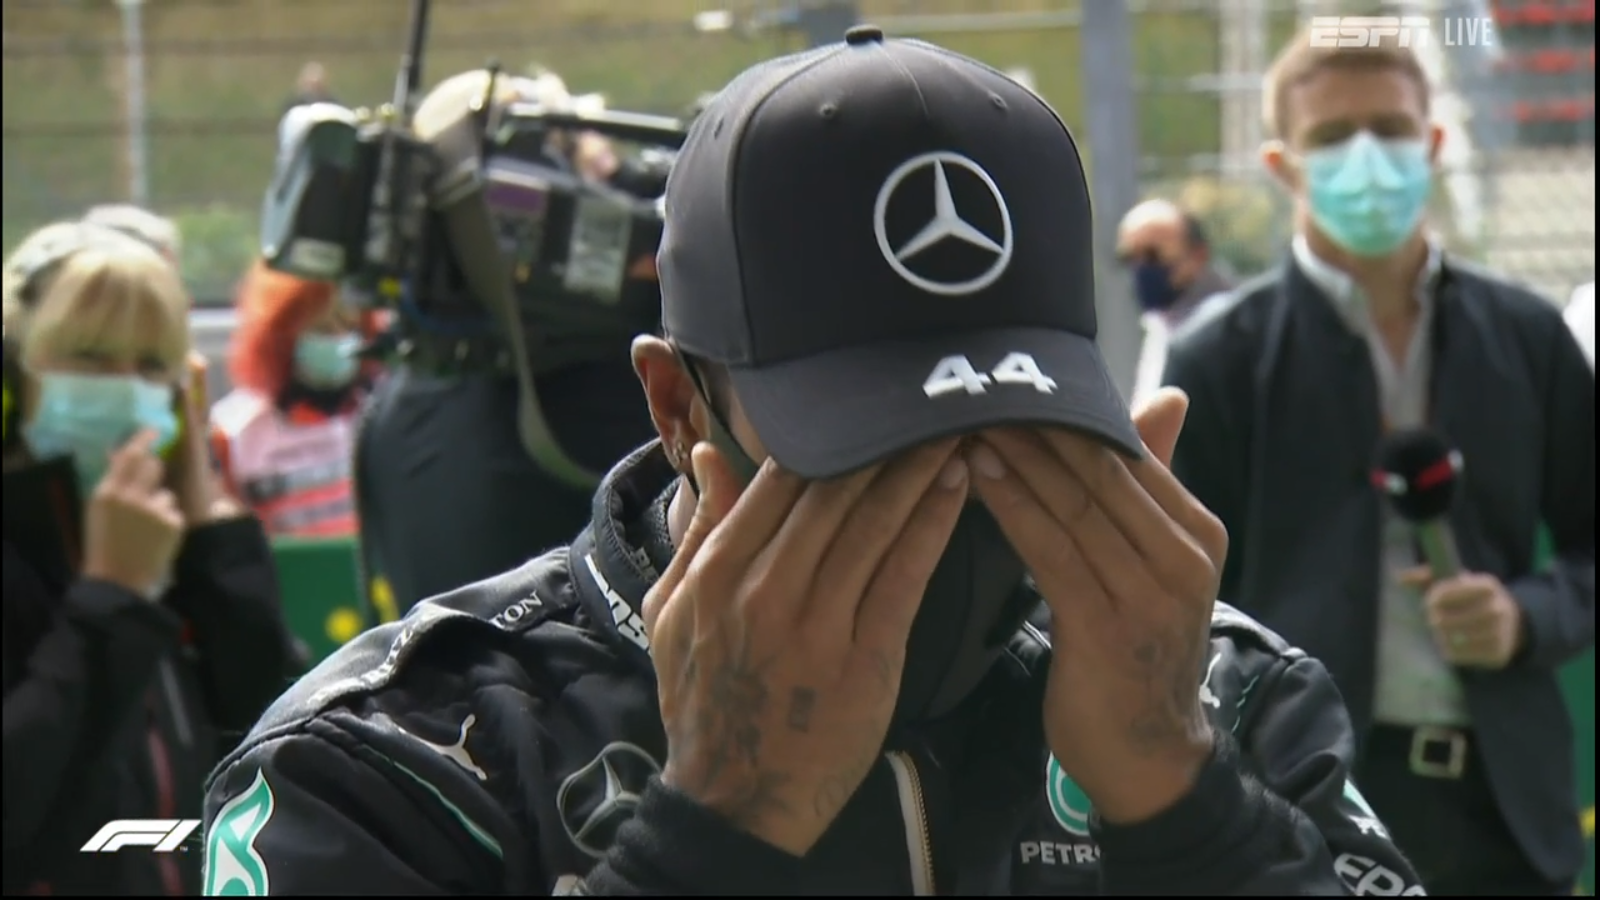 Mercedes AMG's Lewis Hamilton reflects on his amazing performance at the end of Q3 that earned him Pole Position for the Belgian Grand Prix 2020.